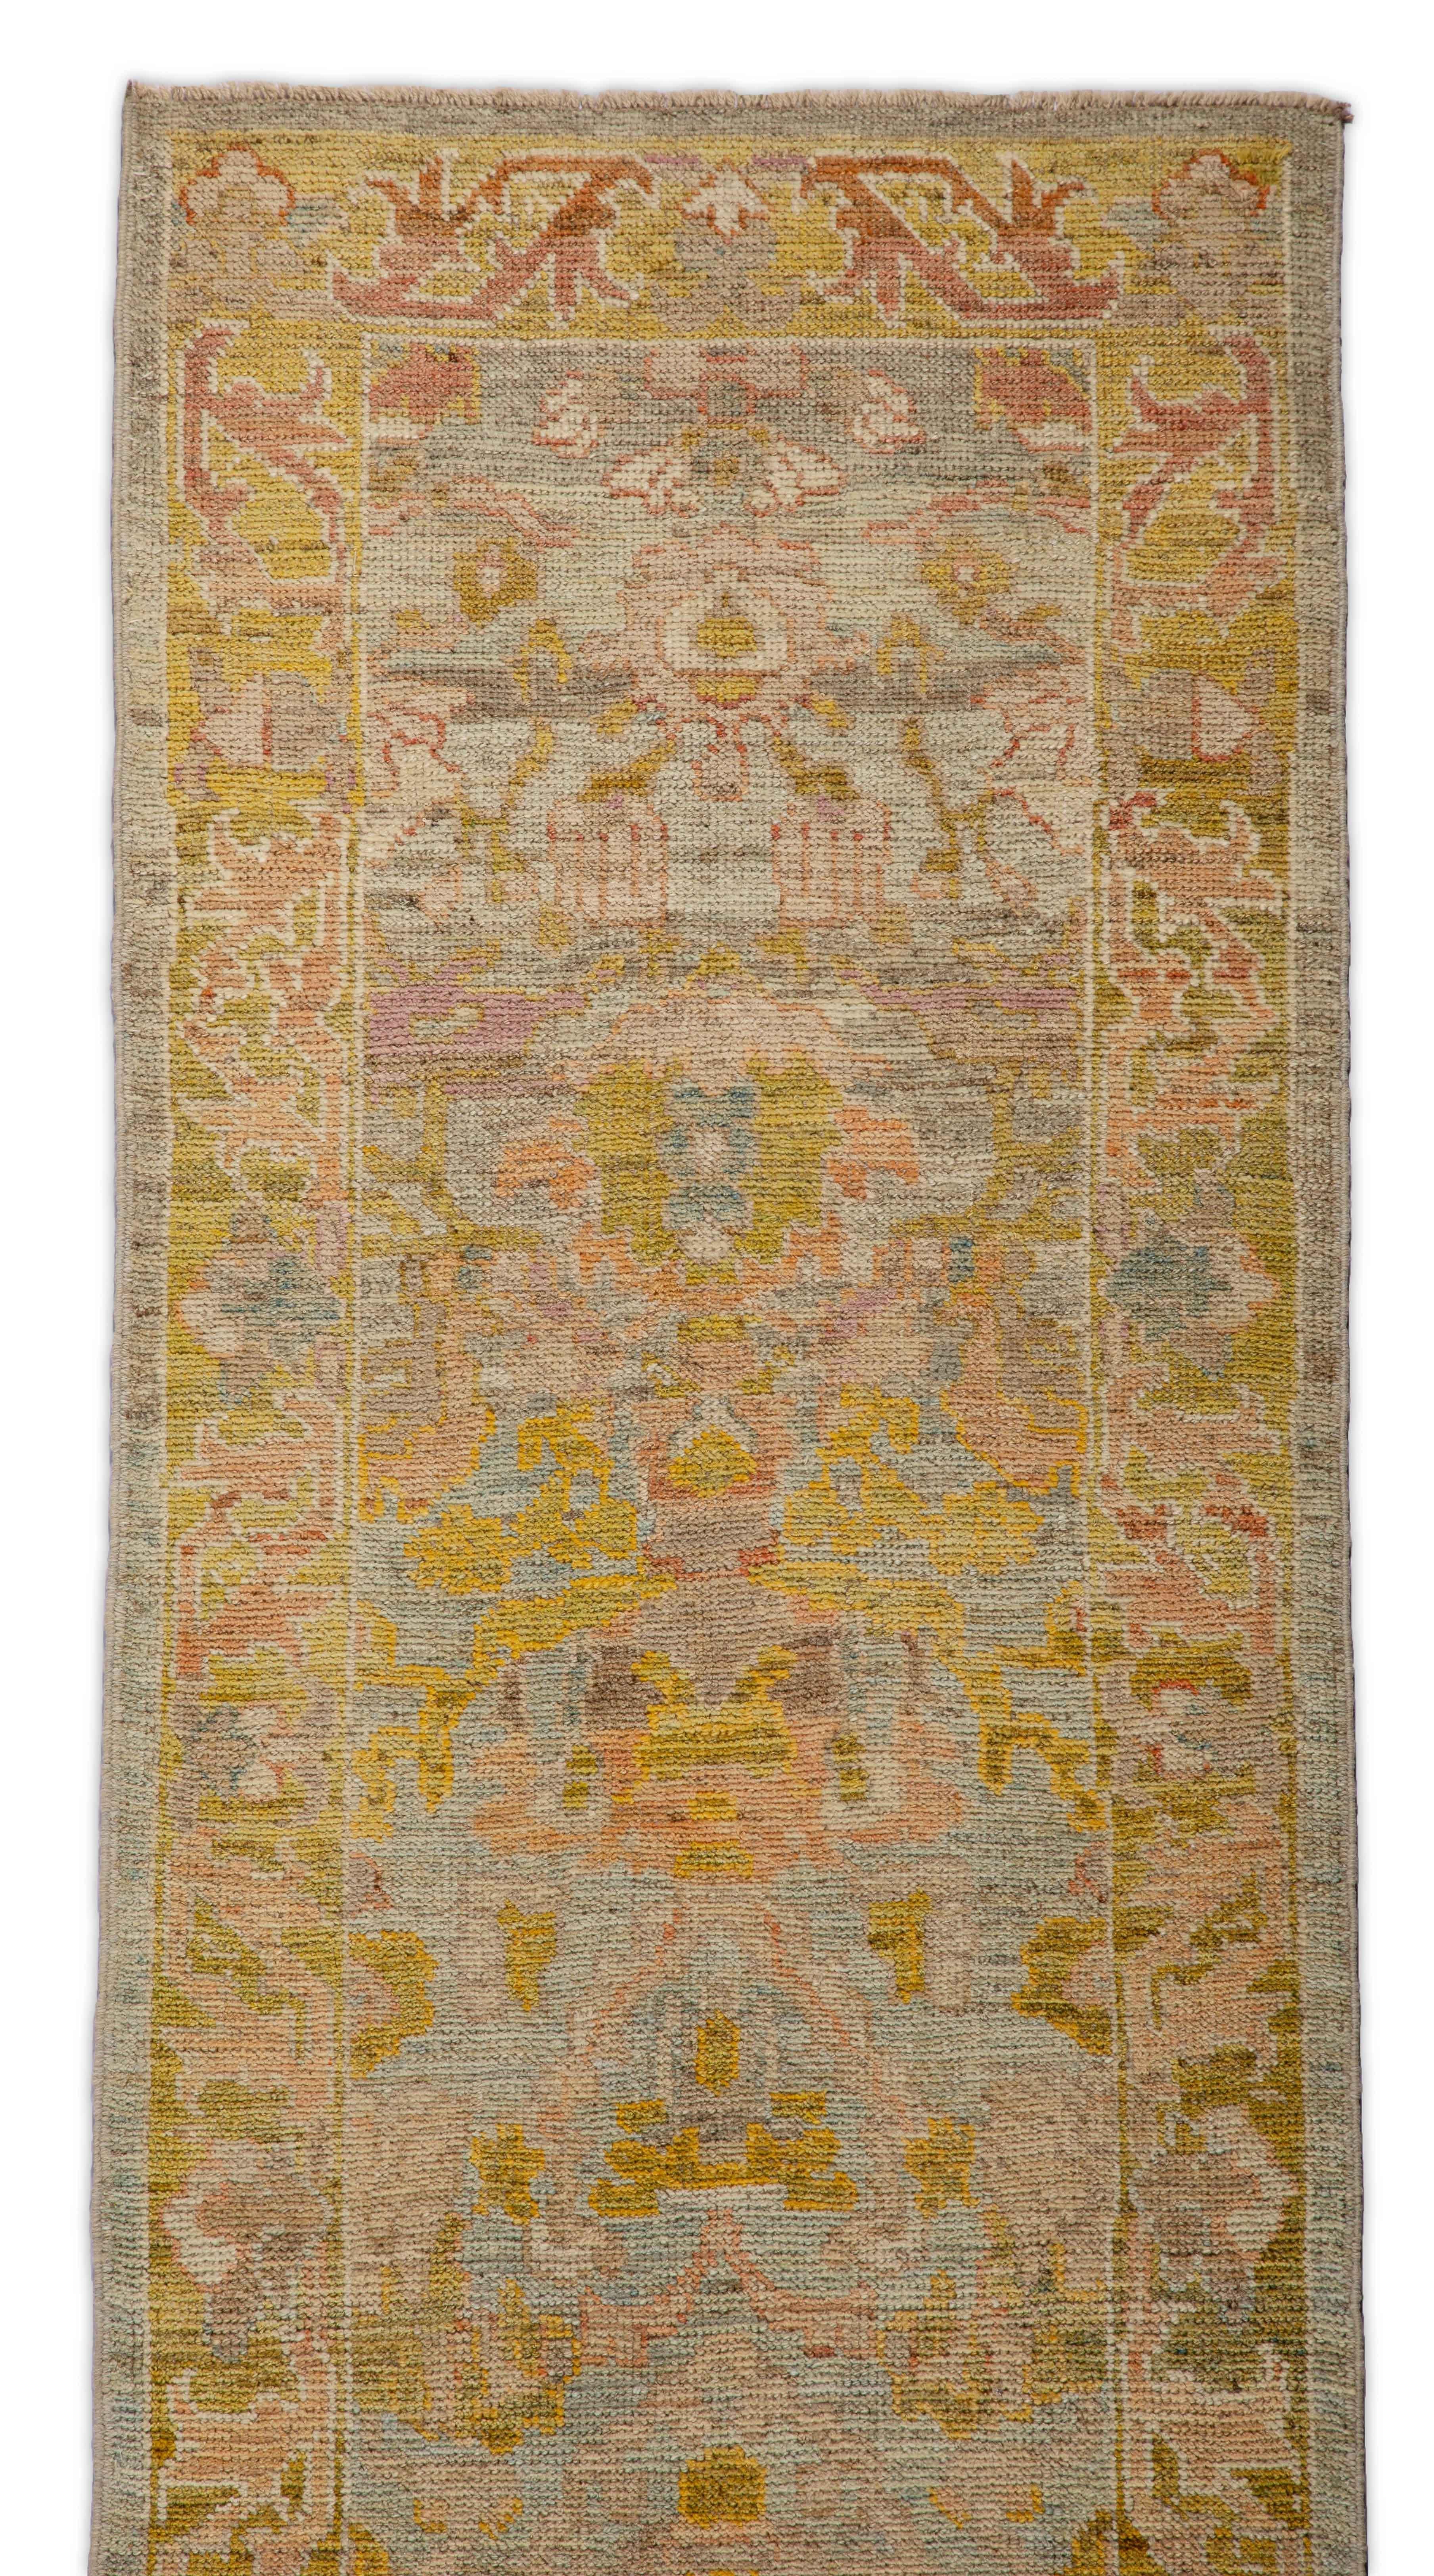 Wool Contemporary Oushak Runner Rug from Turkey with Gold and Pink Floral Patterns